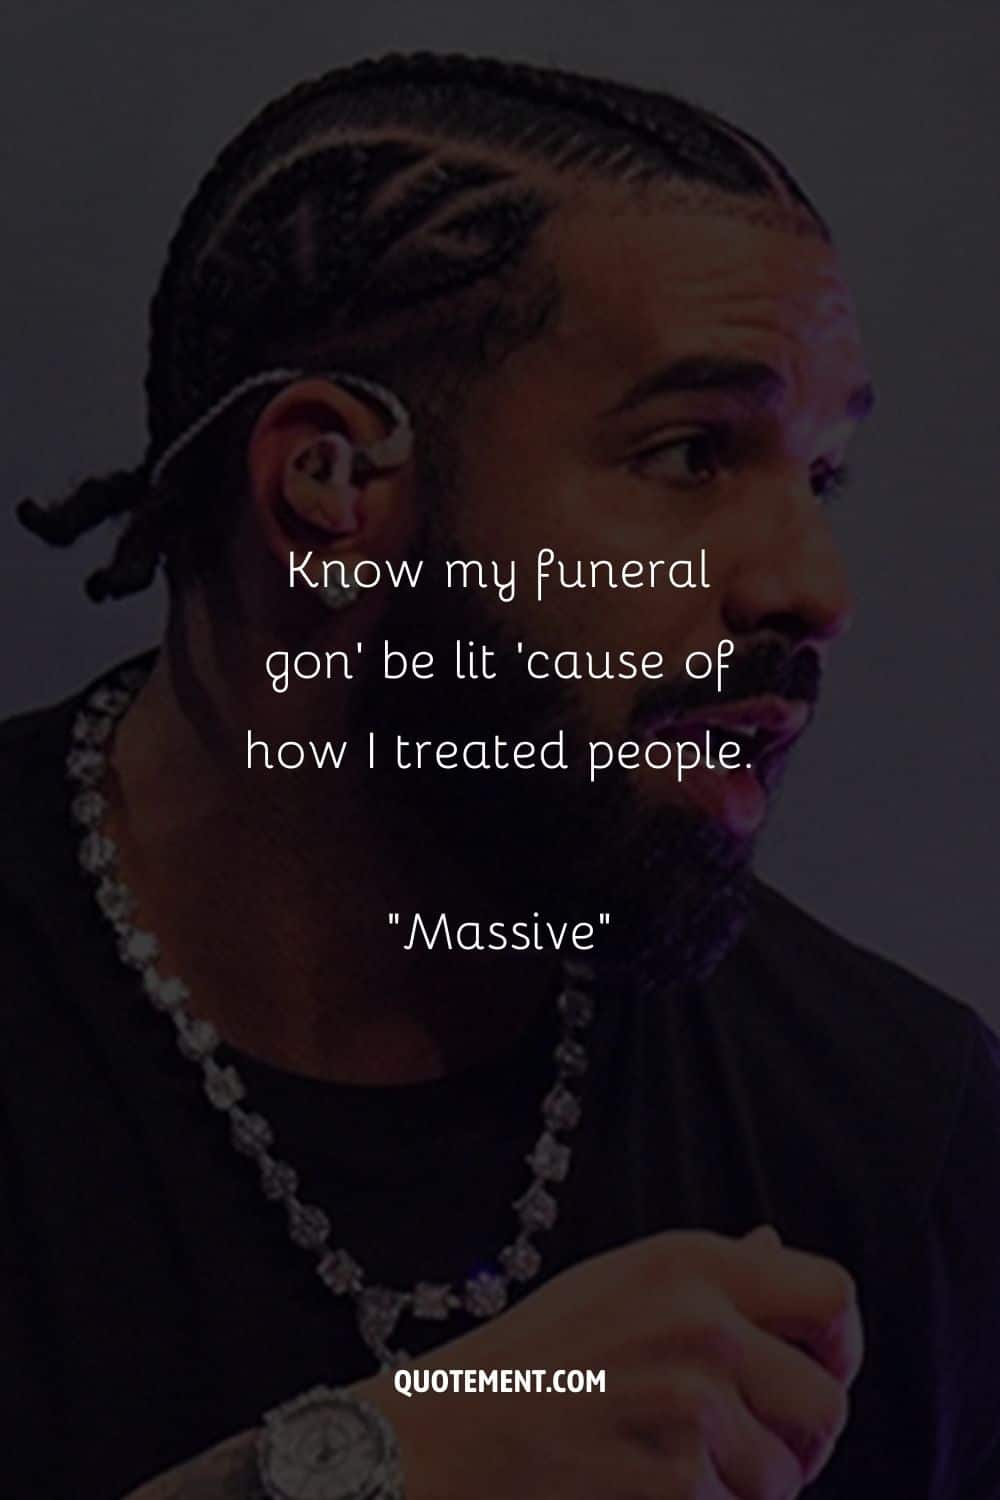 Know my funeral gon’ be lit ’cause of how I treated people.